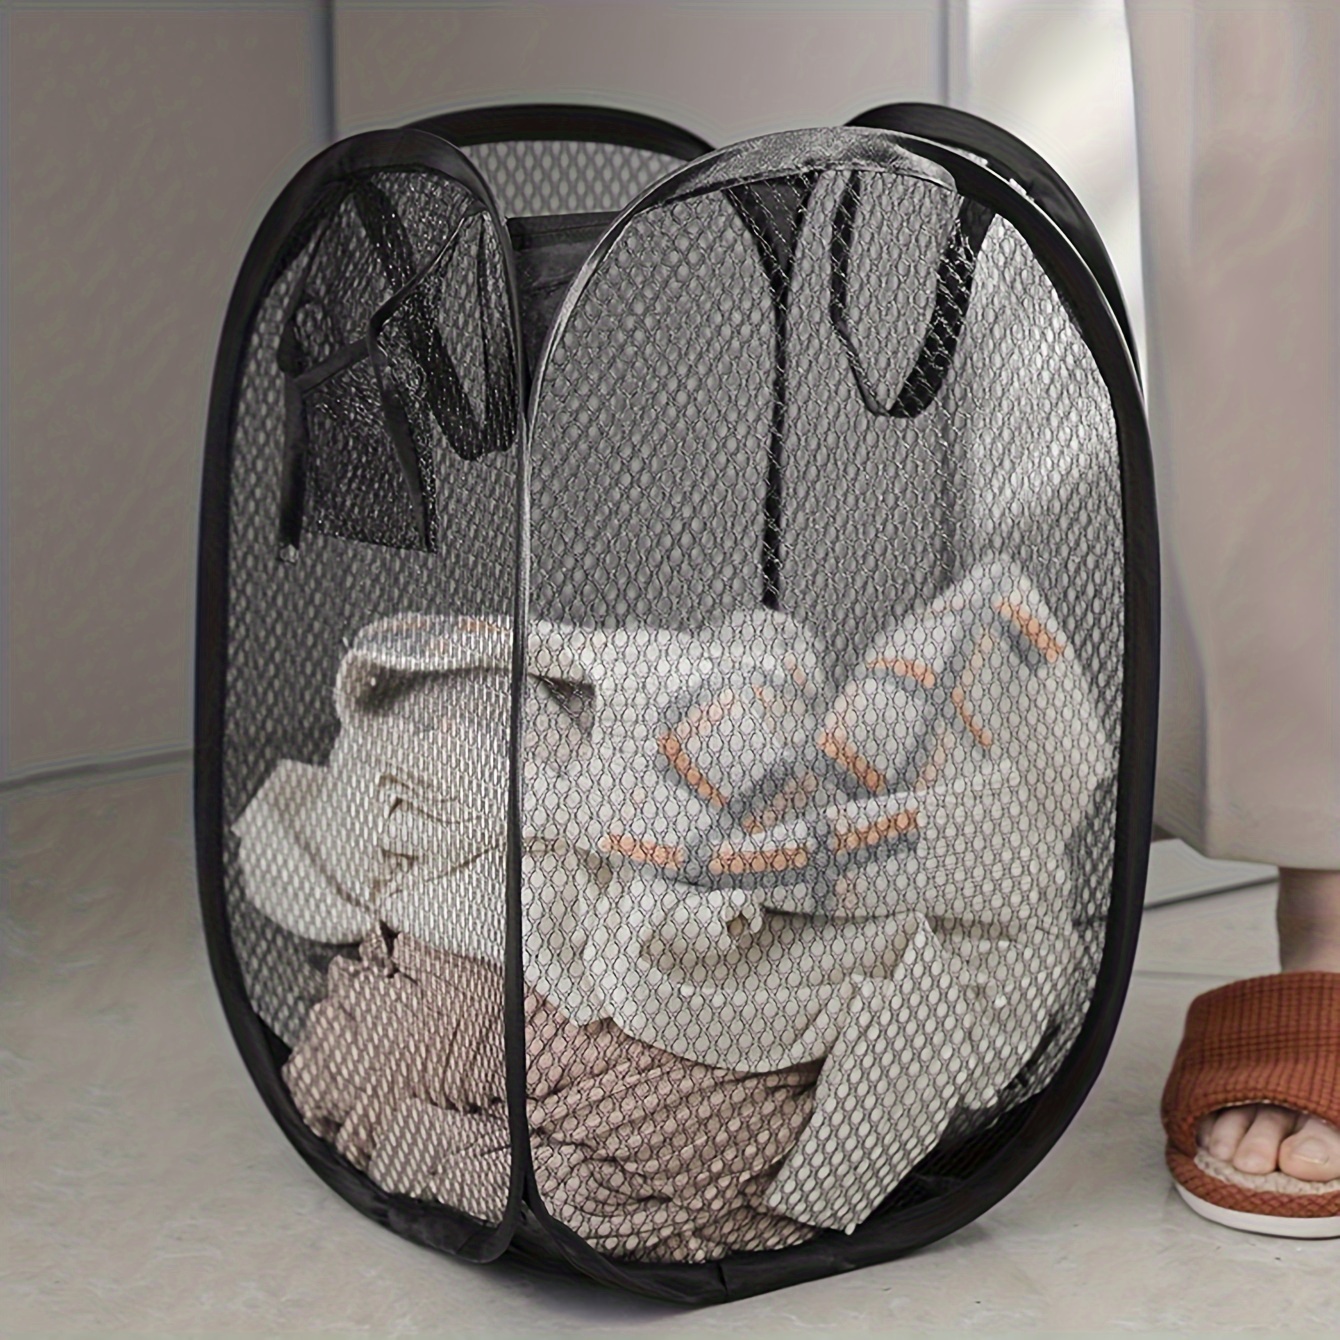 

Extra-large Pop-up Laundry Hamper With Handles - Foldable Mesh Basket For Easy Dirty Clothes Storage, Essential Home Organizer